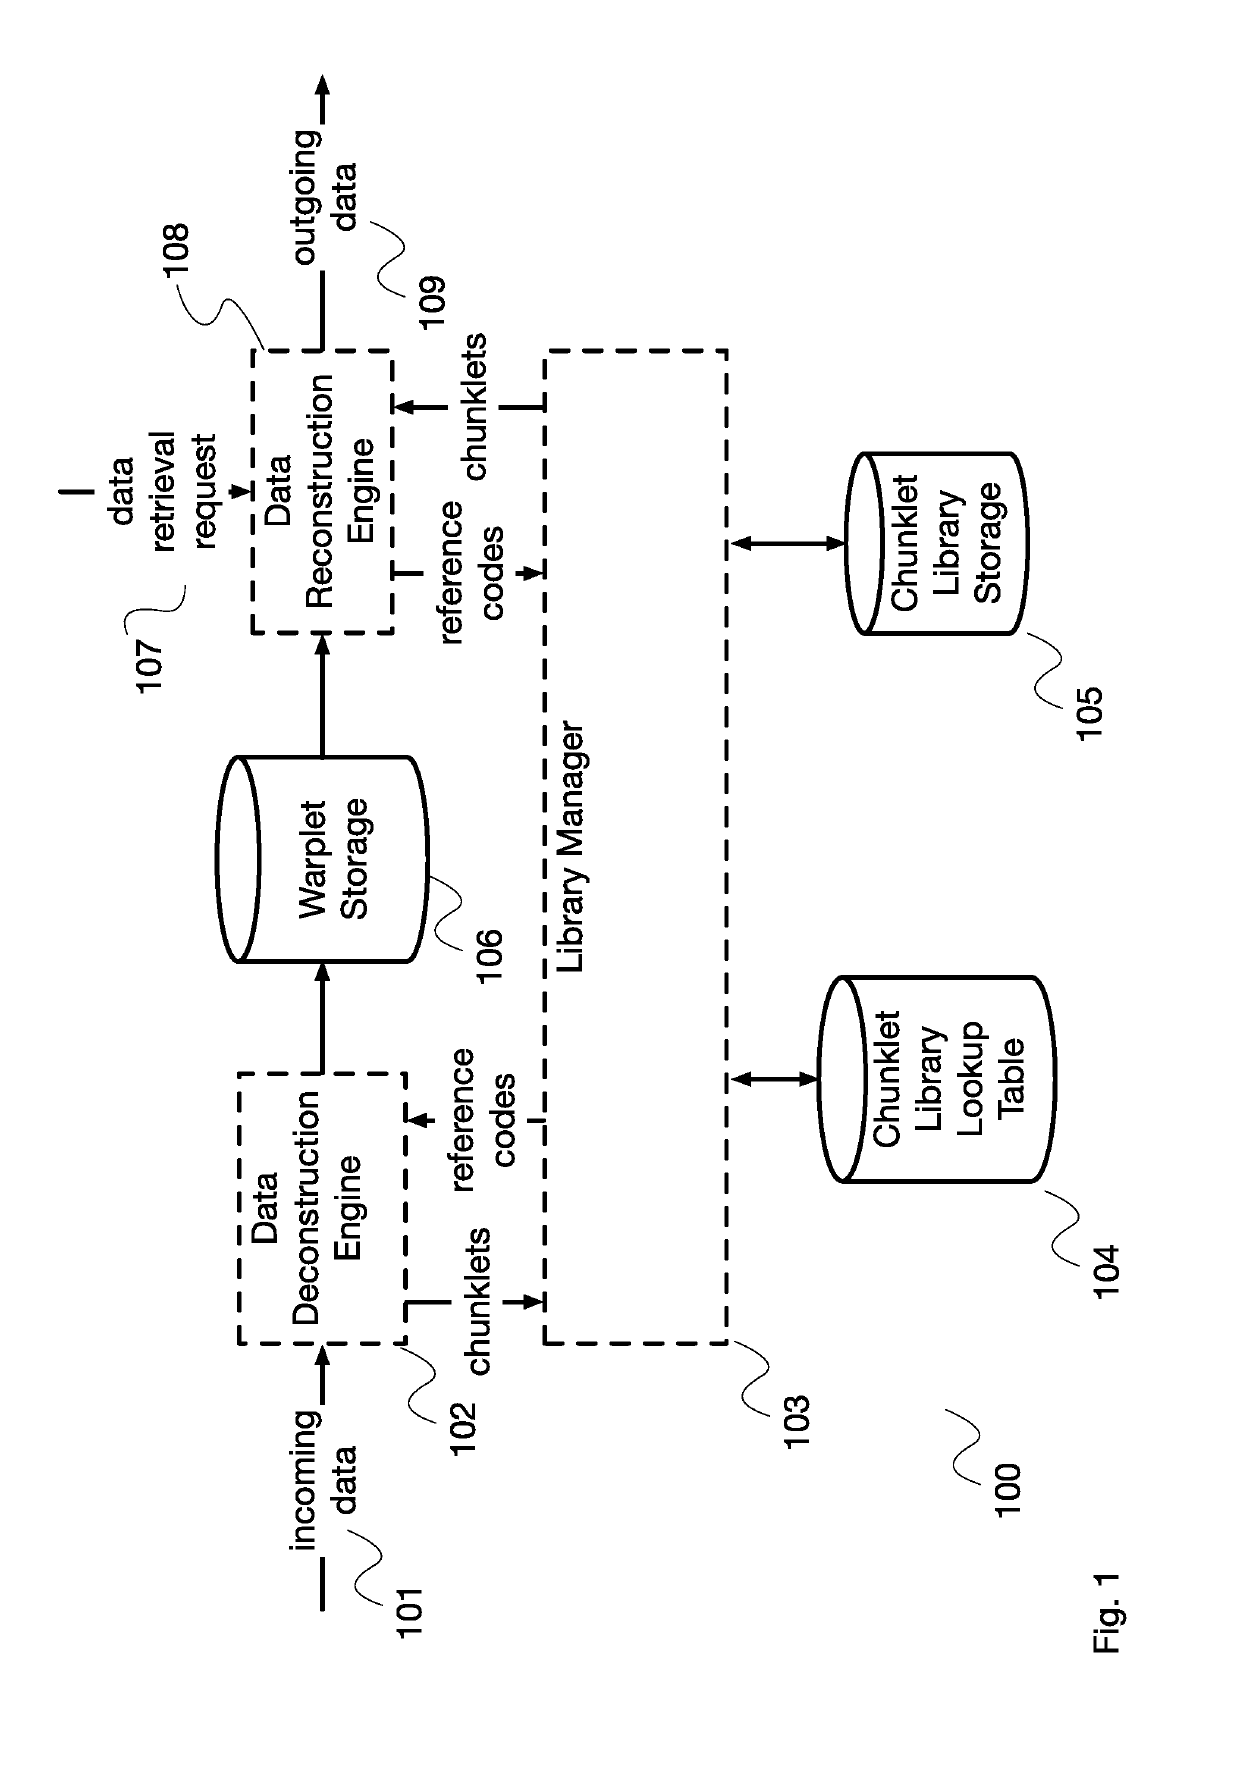 System and method for data storage, transfer, synchronization, and security